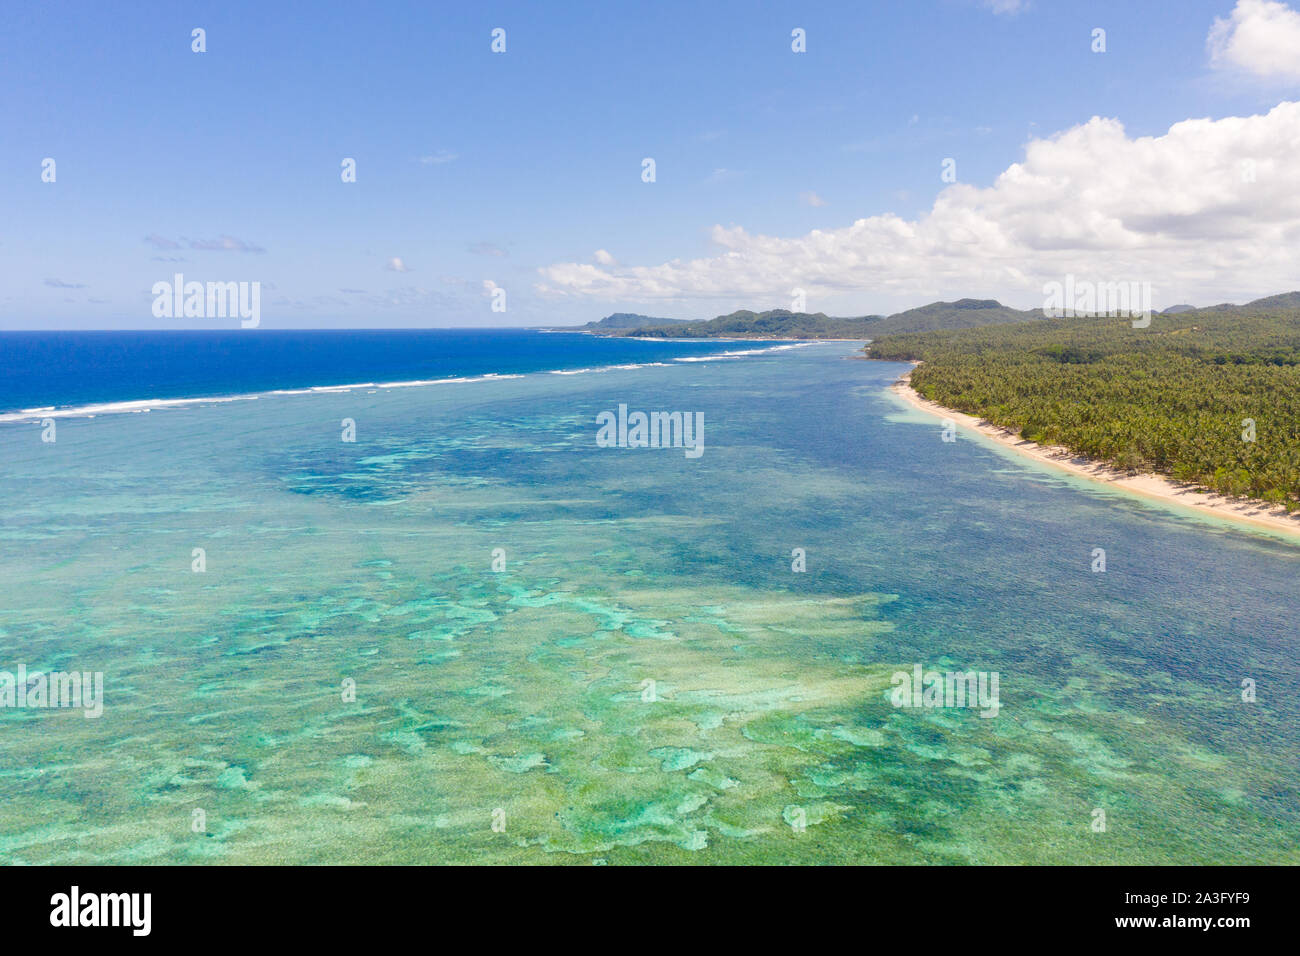 Seascape, coast of the island of Siargao, Philippines. Blue sea with waves and sky with big clouds, top view. Stock Photo